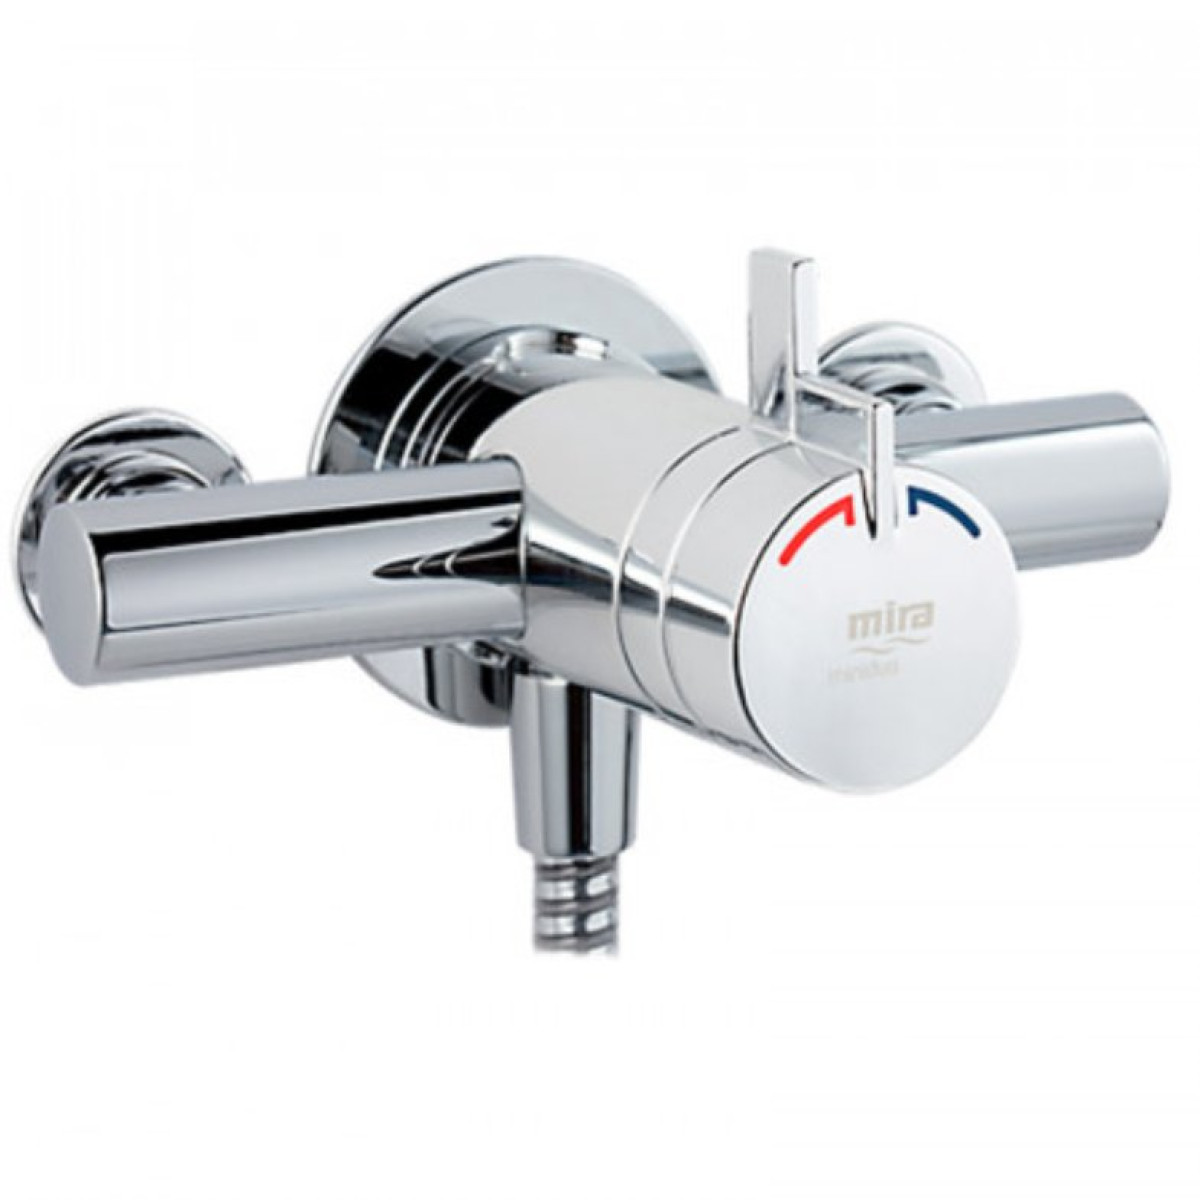 Mira Miniduo Exposed Shower Valve Low Prices Showerstoyou Co Uk